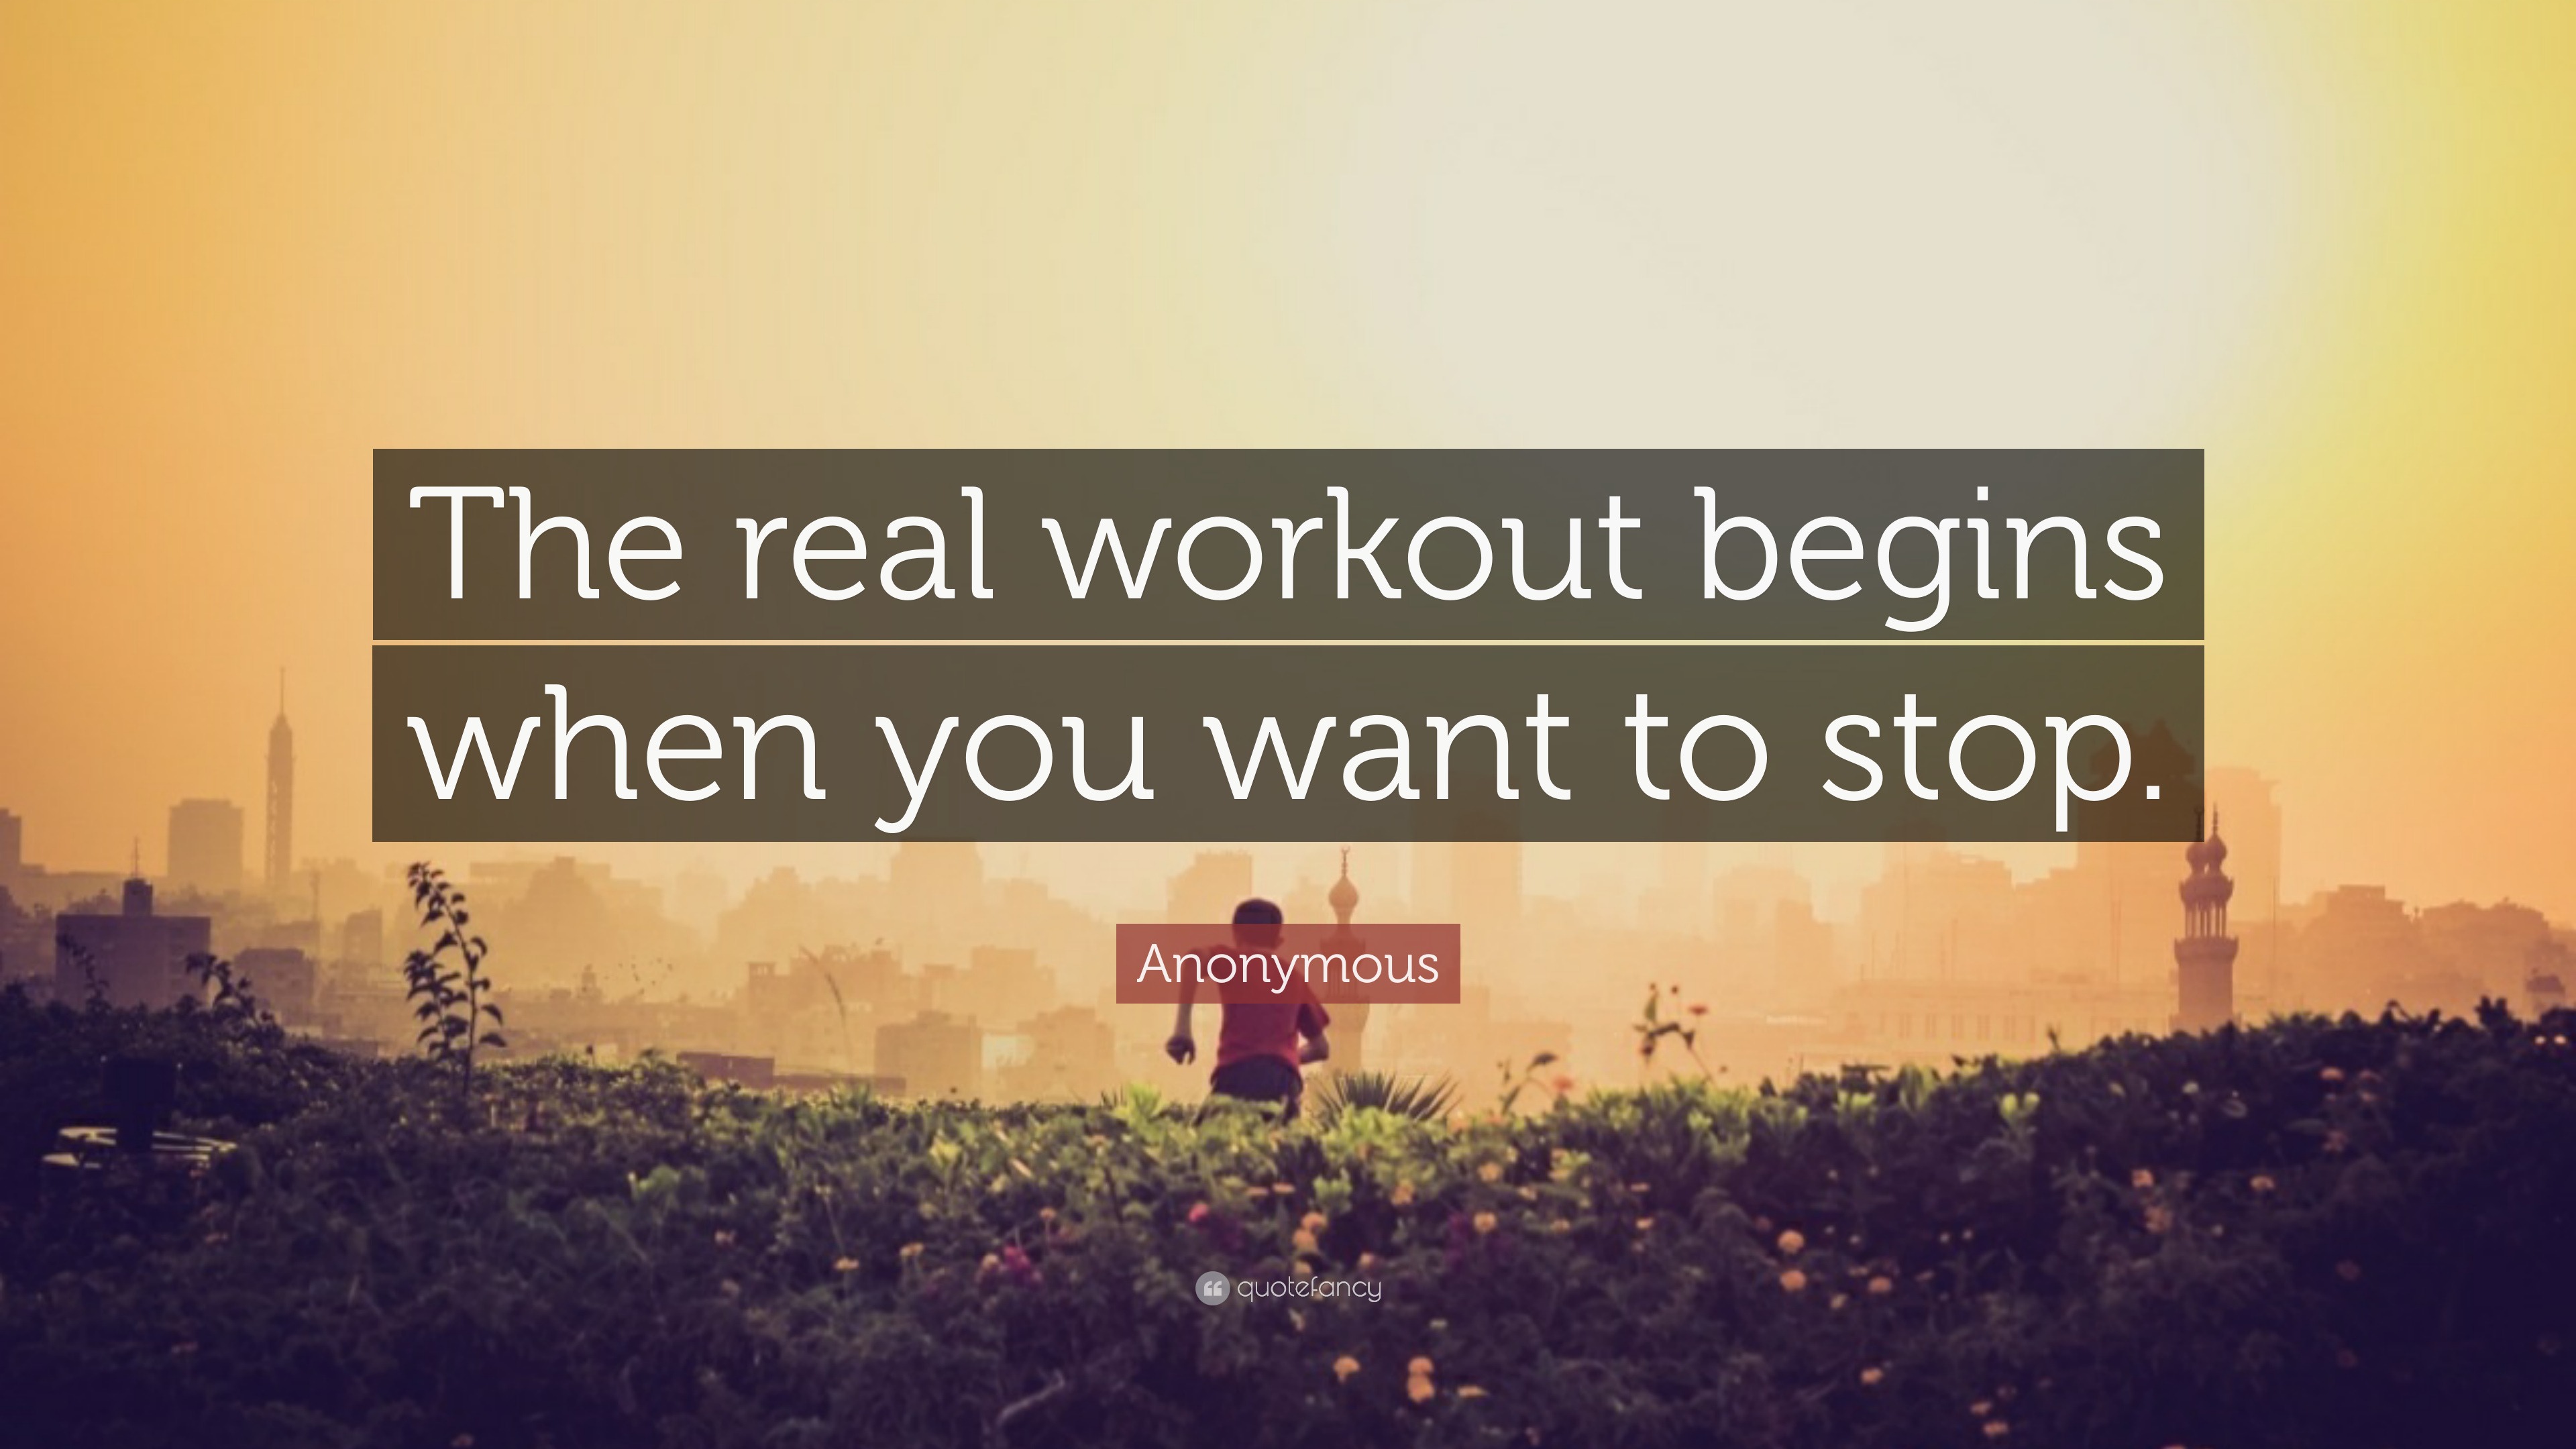 Best The real workout starts when you want to stop for Weight Loss